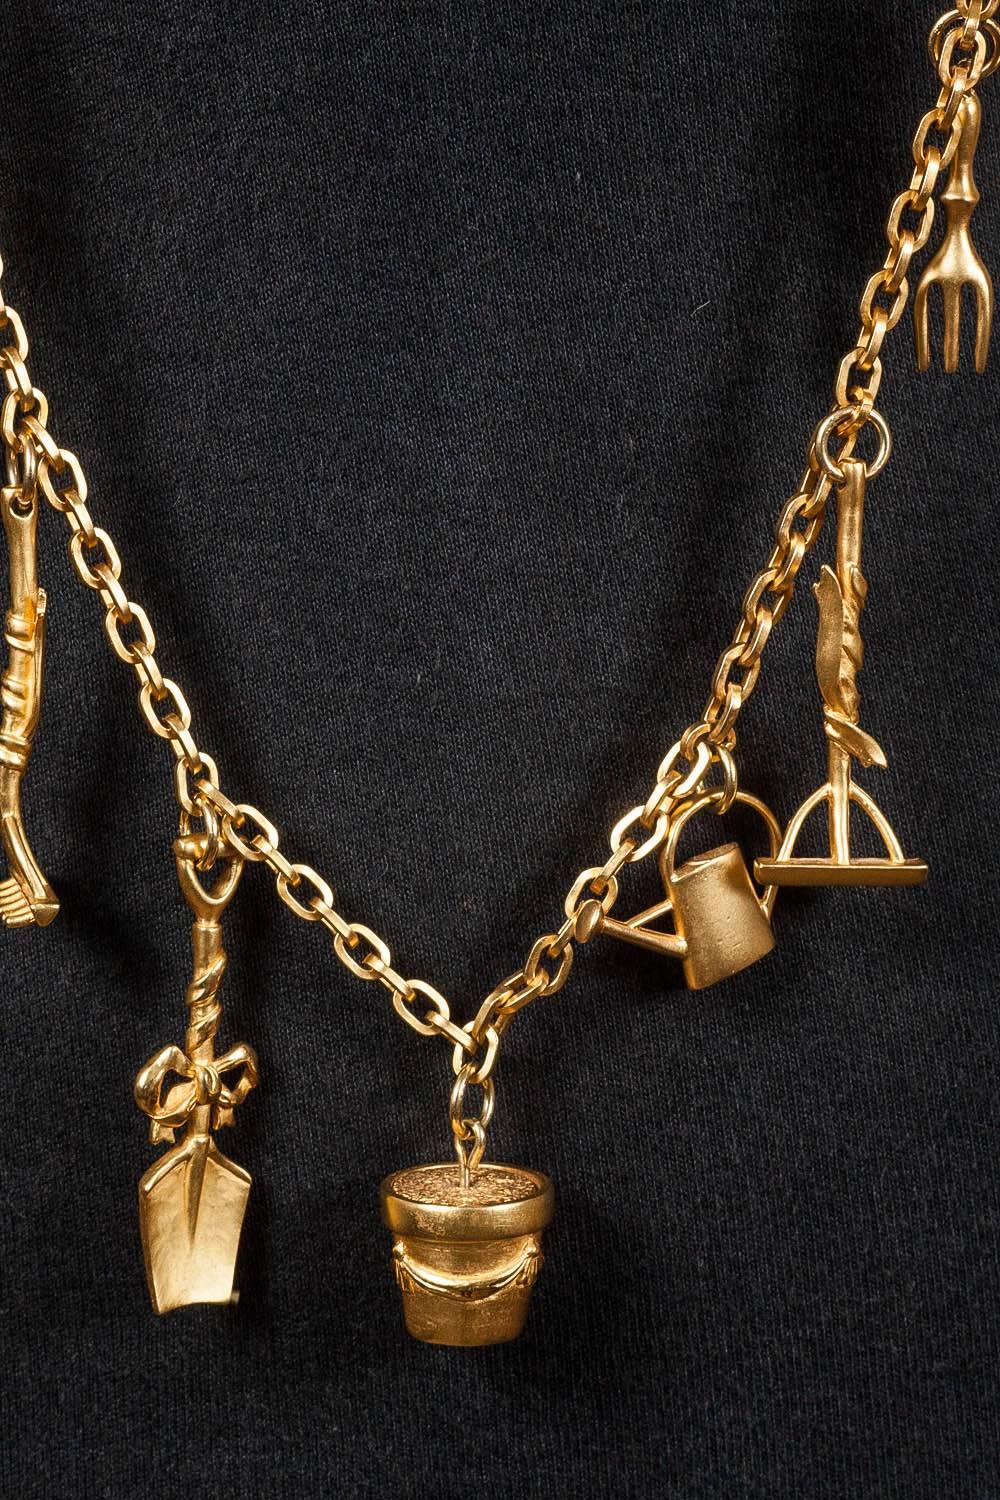 A glorious necklace, of excellent quality!
Designed by Karl Lagerfeld for his own label in the 1990s, this necklace is made with assorted 'gardening' tools and objets, cascading from a very simple classic chain,  all in a soft matt gilding. Spades,